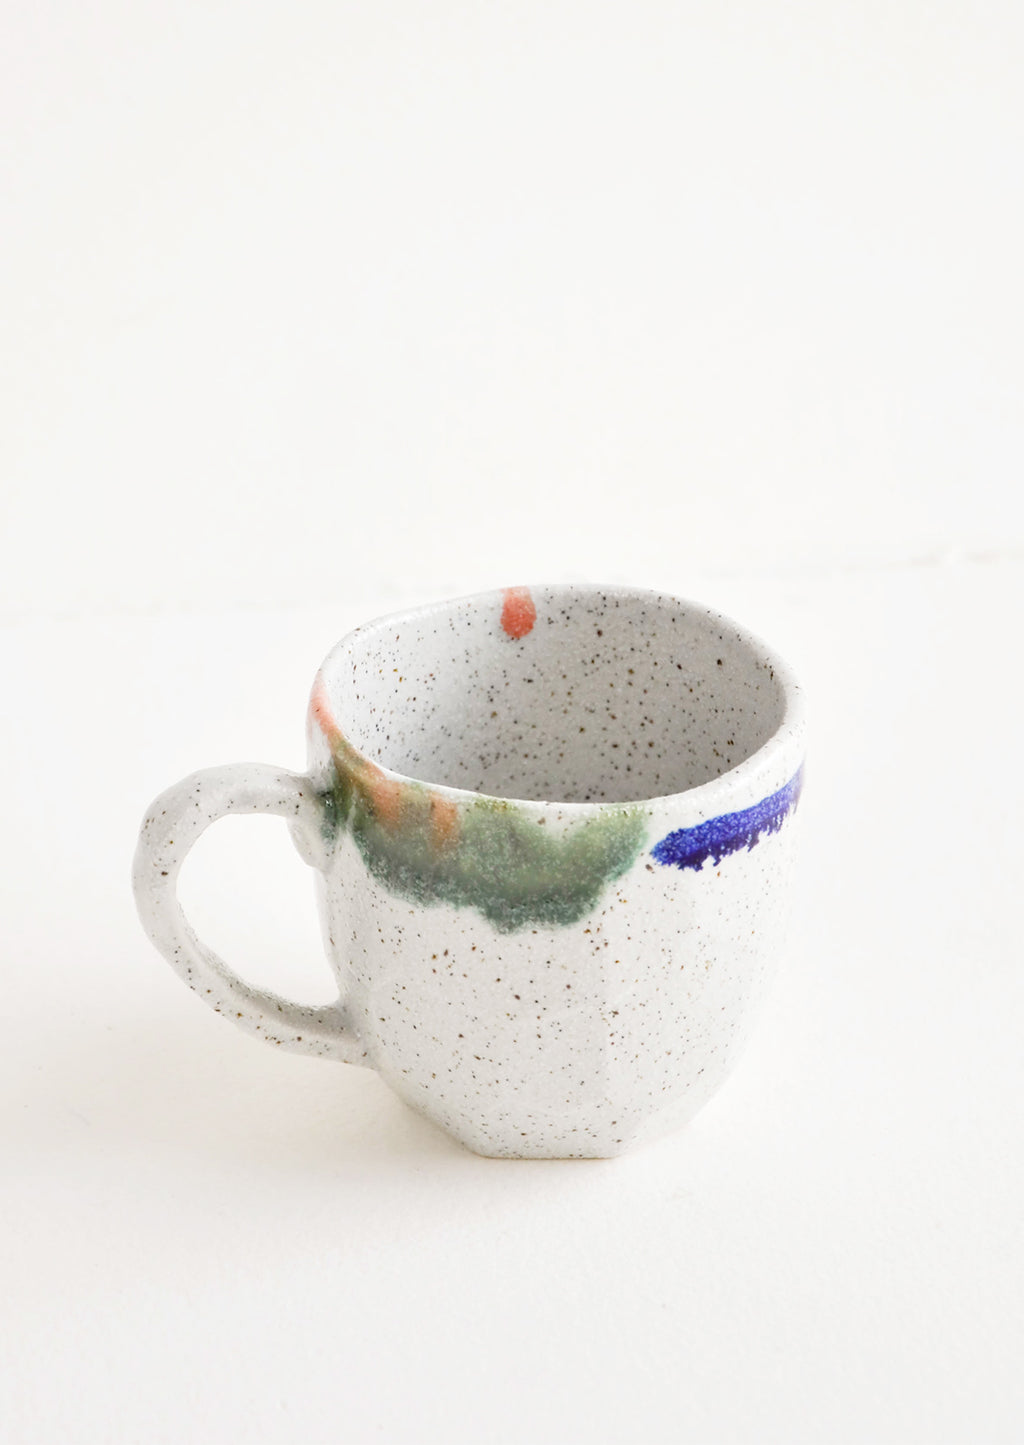 8 oz [$22.00]: A short gray ceramic mug with blue, green, and pink painted rims.